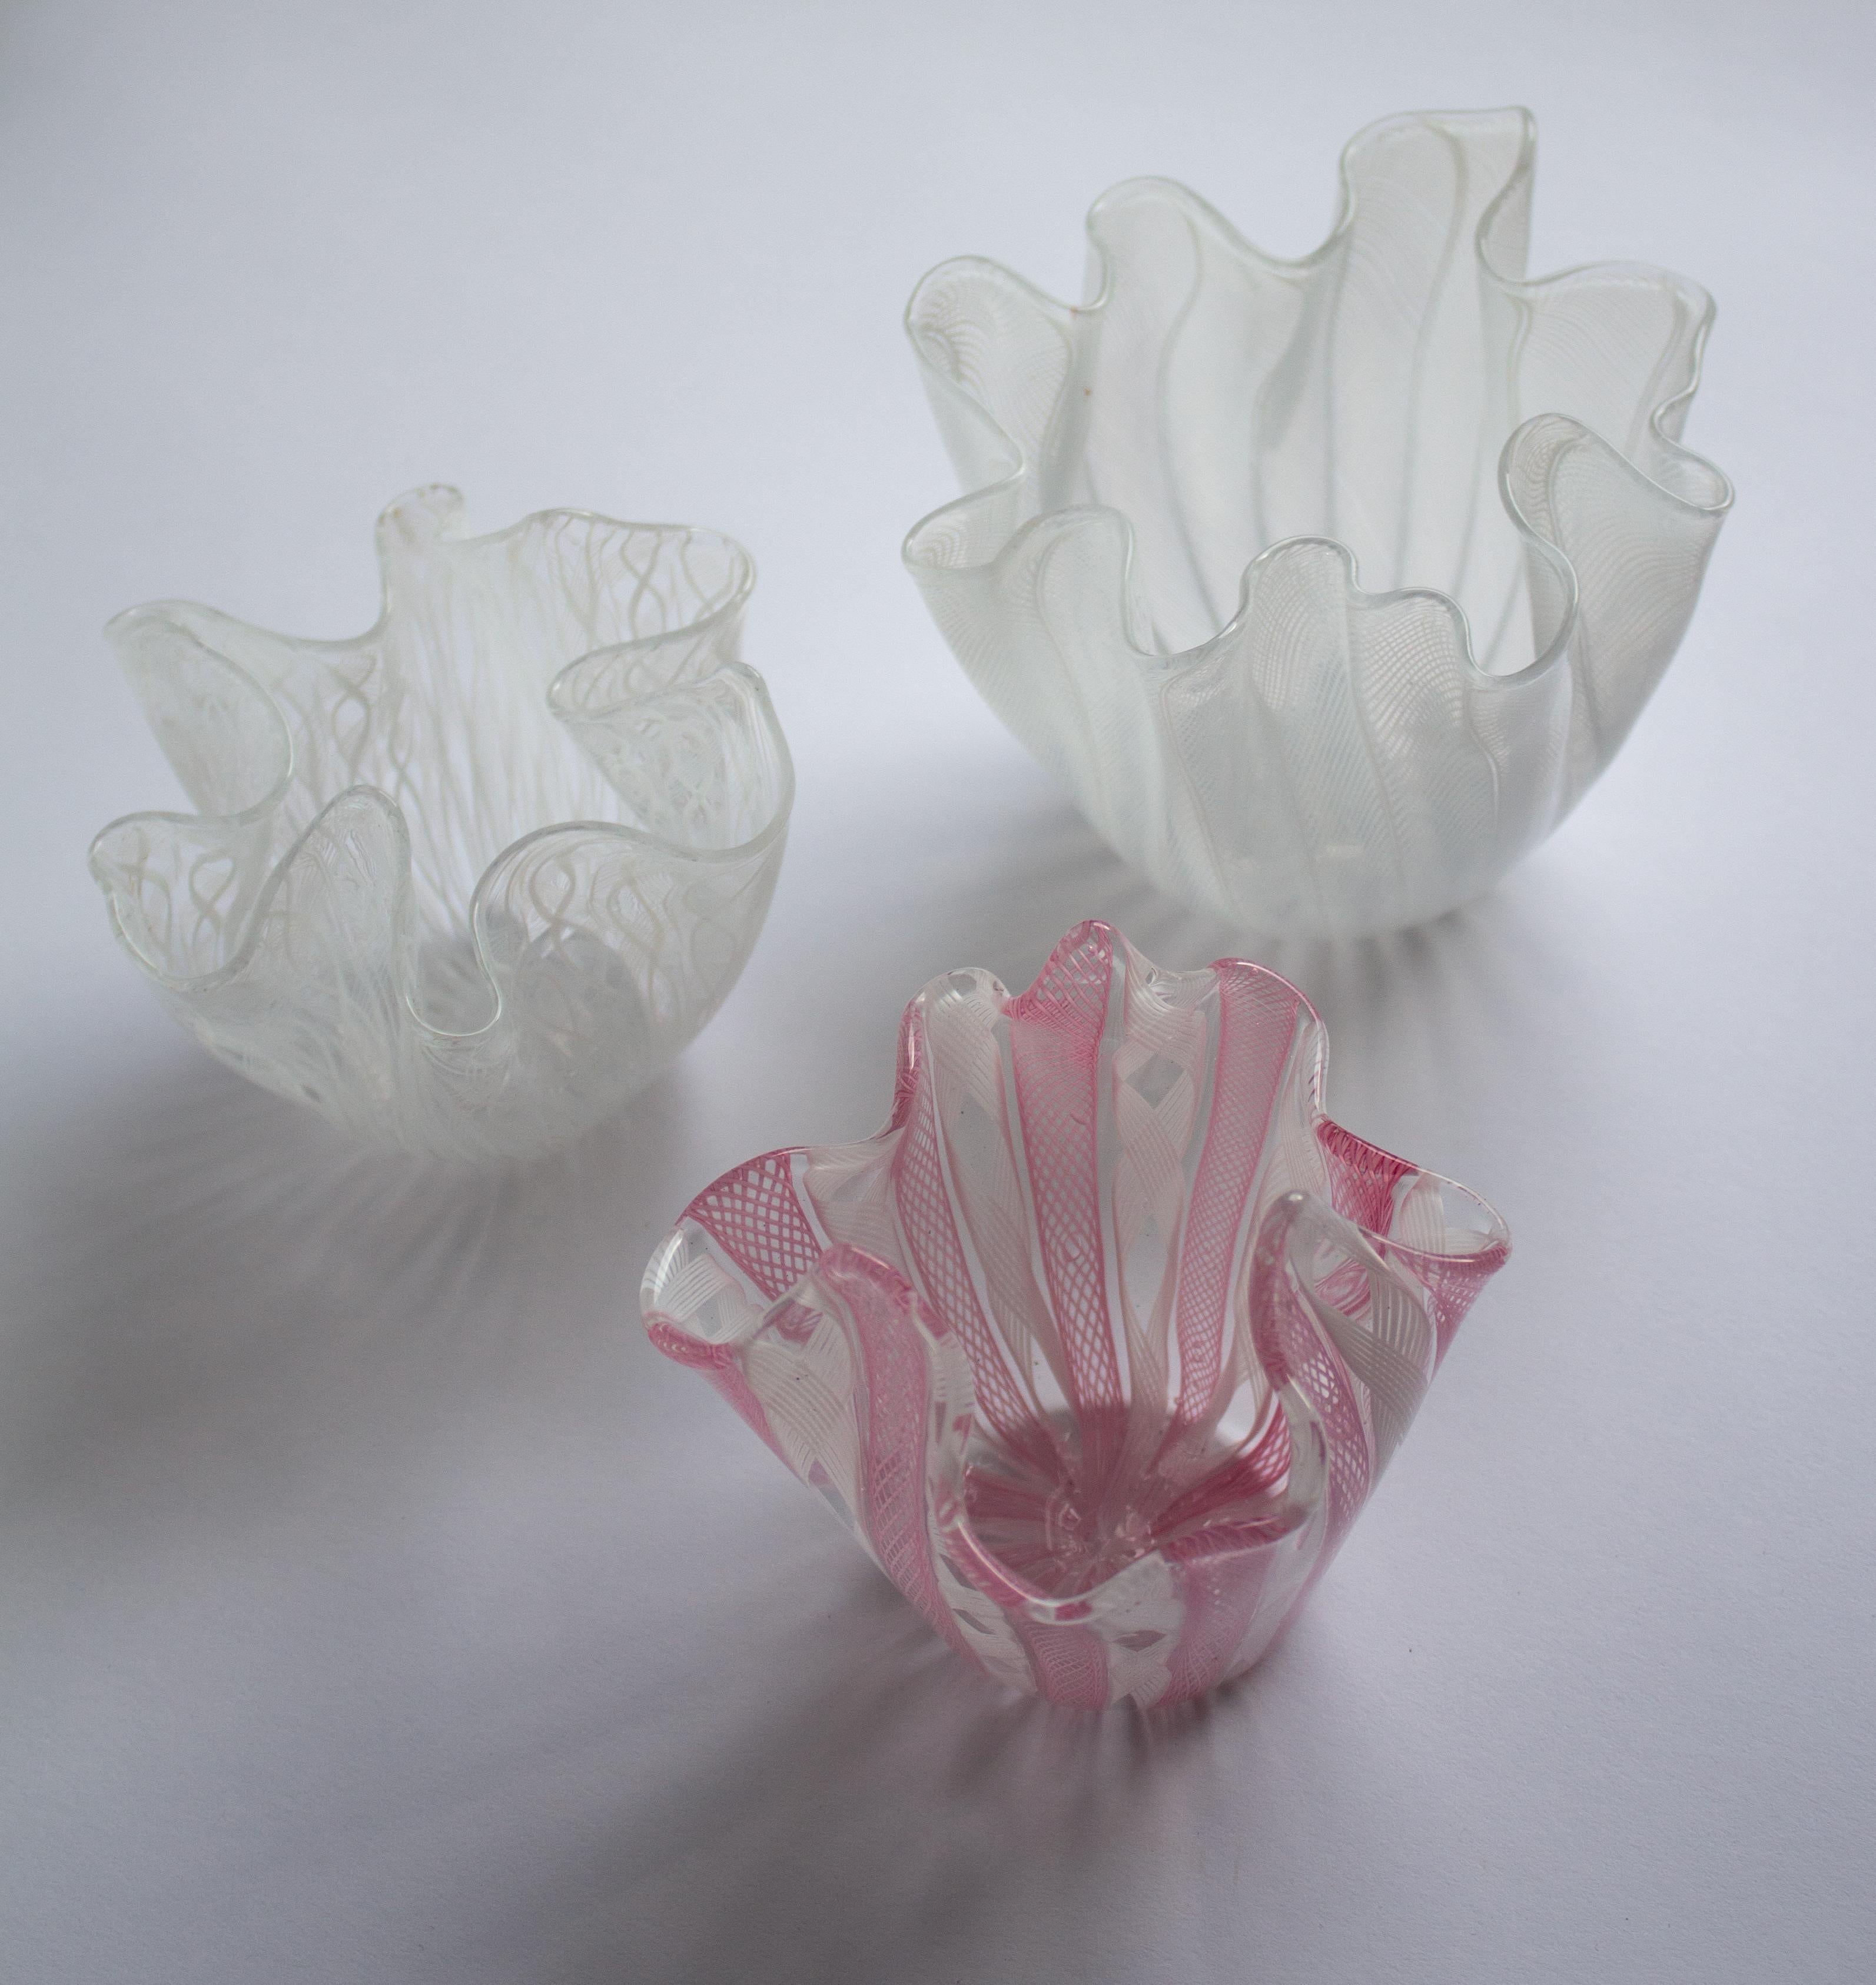 Hand-Crafted 3 Murano Handkerchief Vases Bowls from Murano, Venini, Italy For Sale